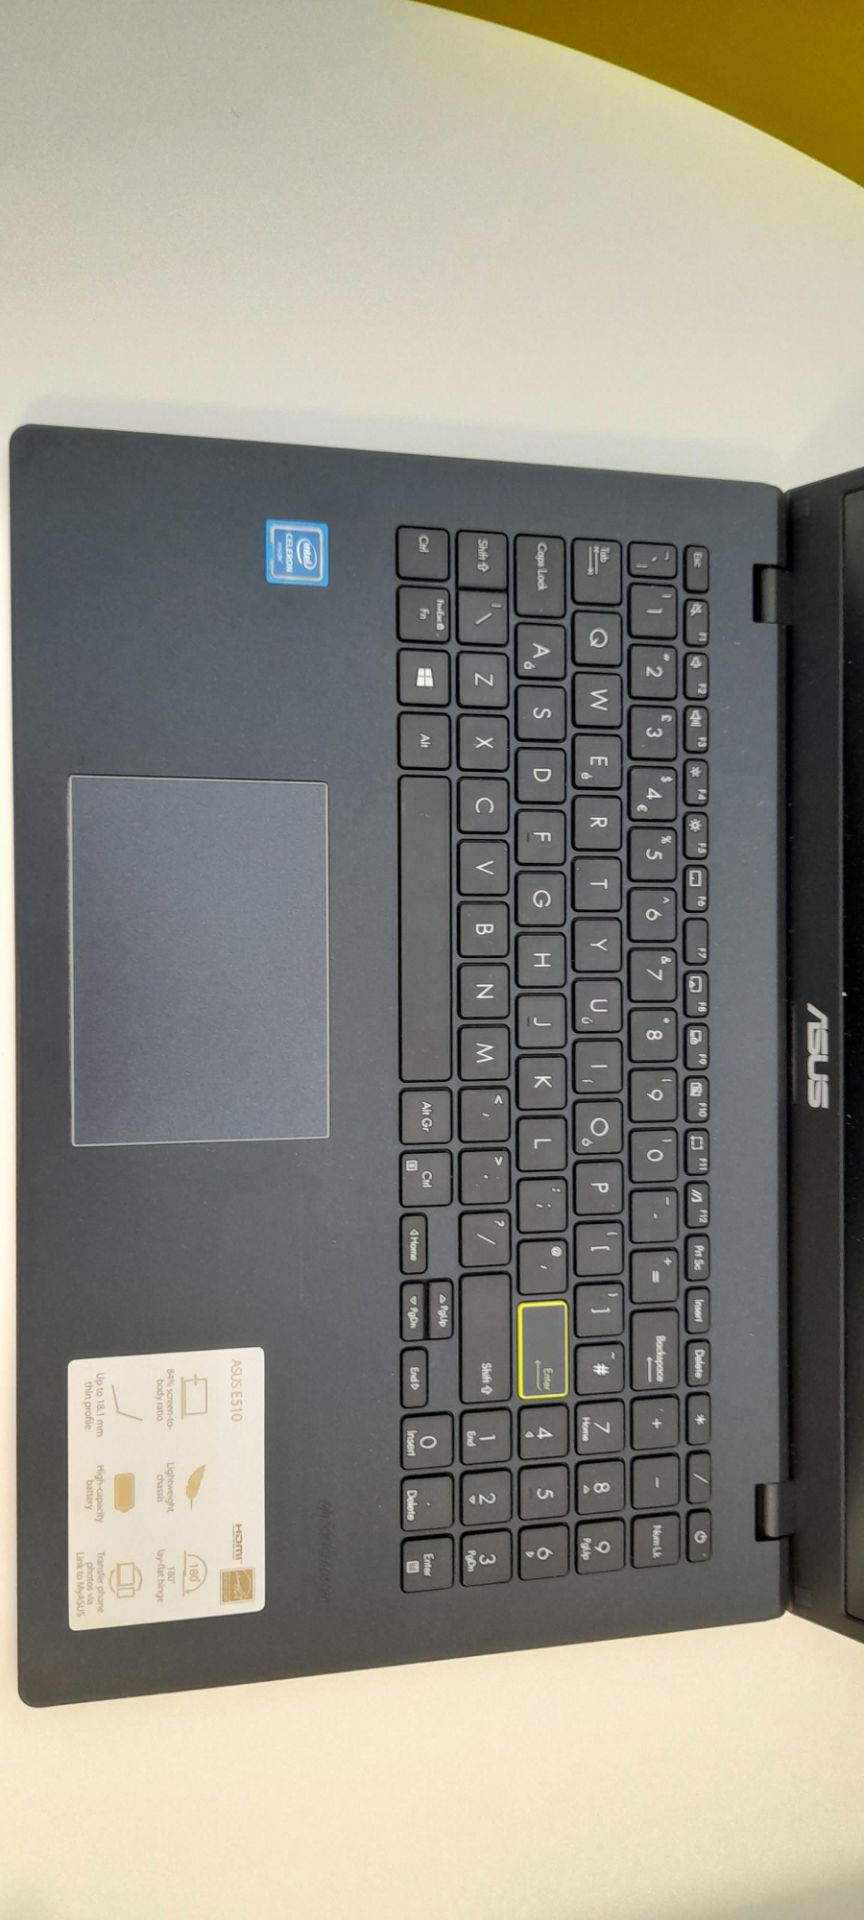 ASUS E510M Notebook PC, intel Celeron inside with charger. Collection from Canary Wharf, London, - Image 6 of 9